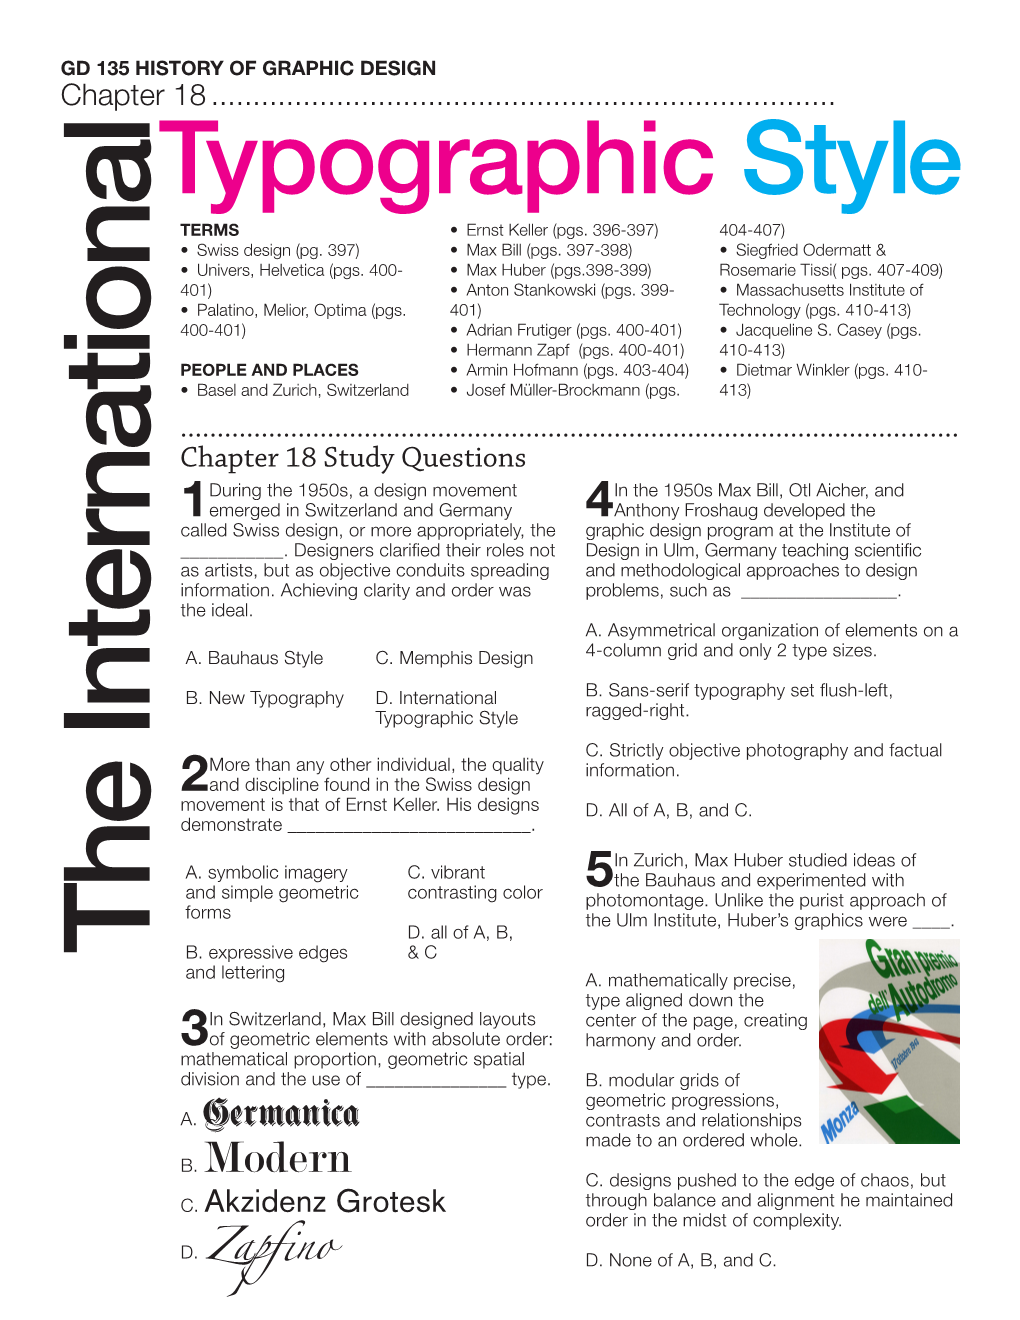 Typographic Style TERMS • Ernst Keller (Pgs